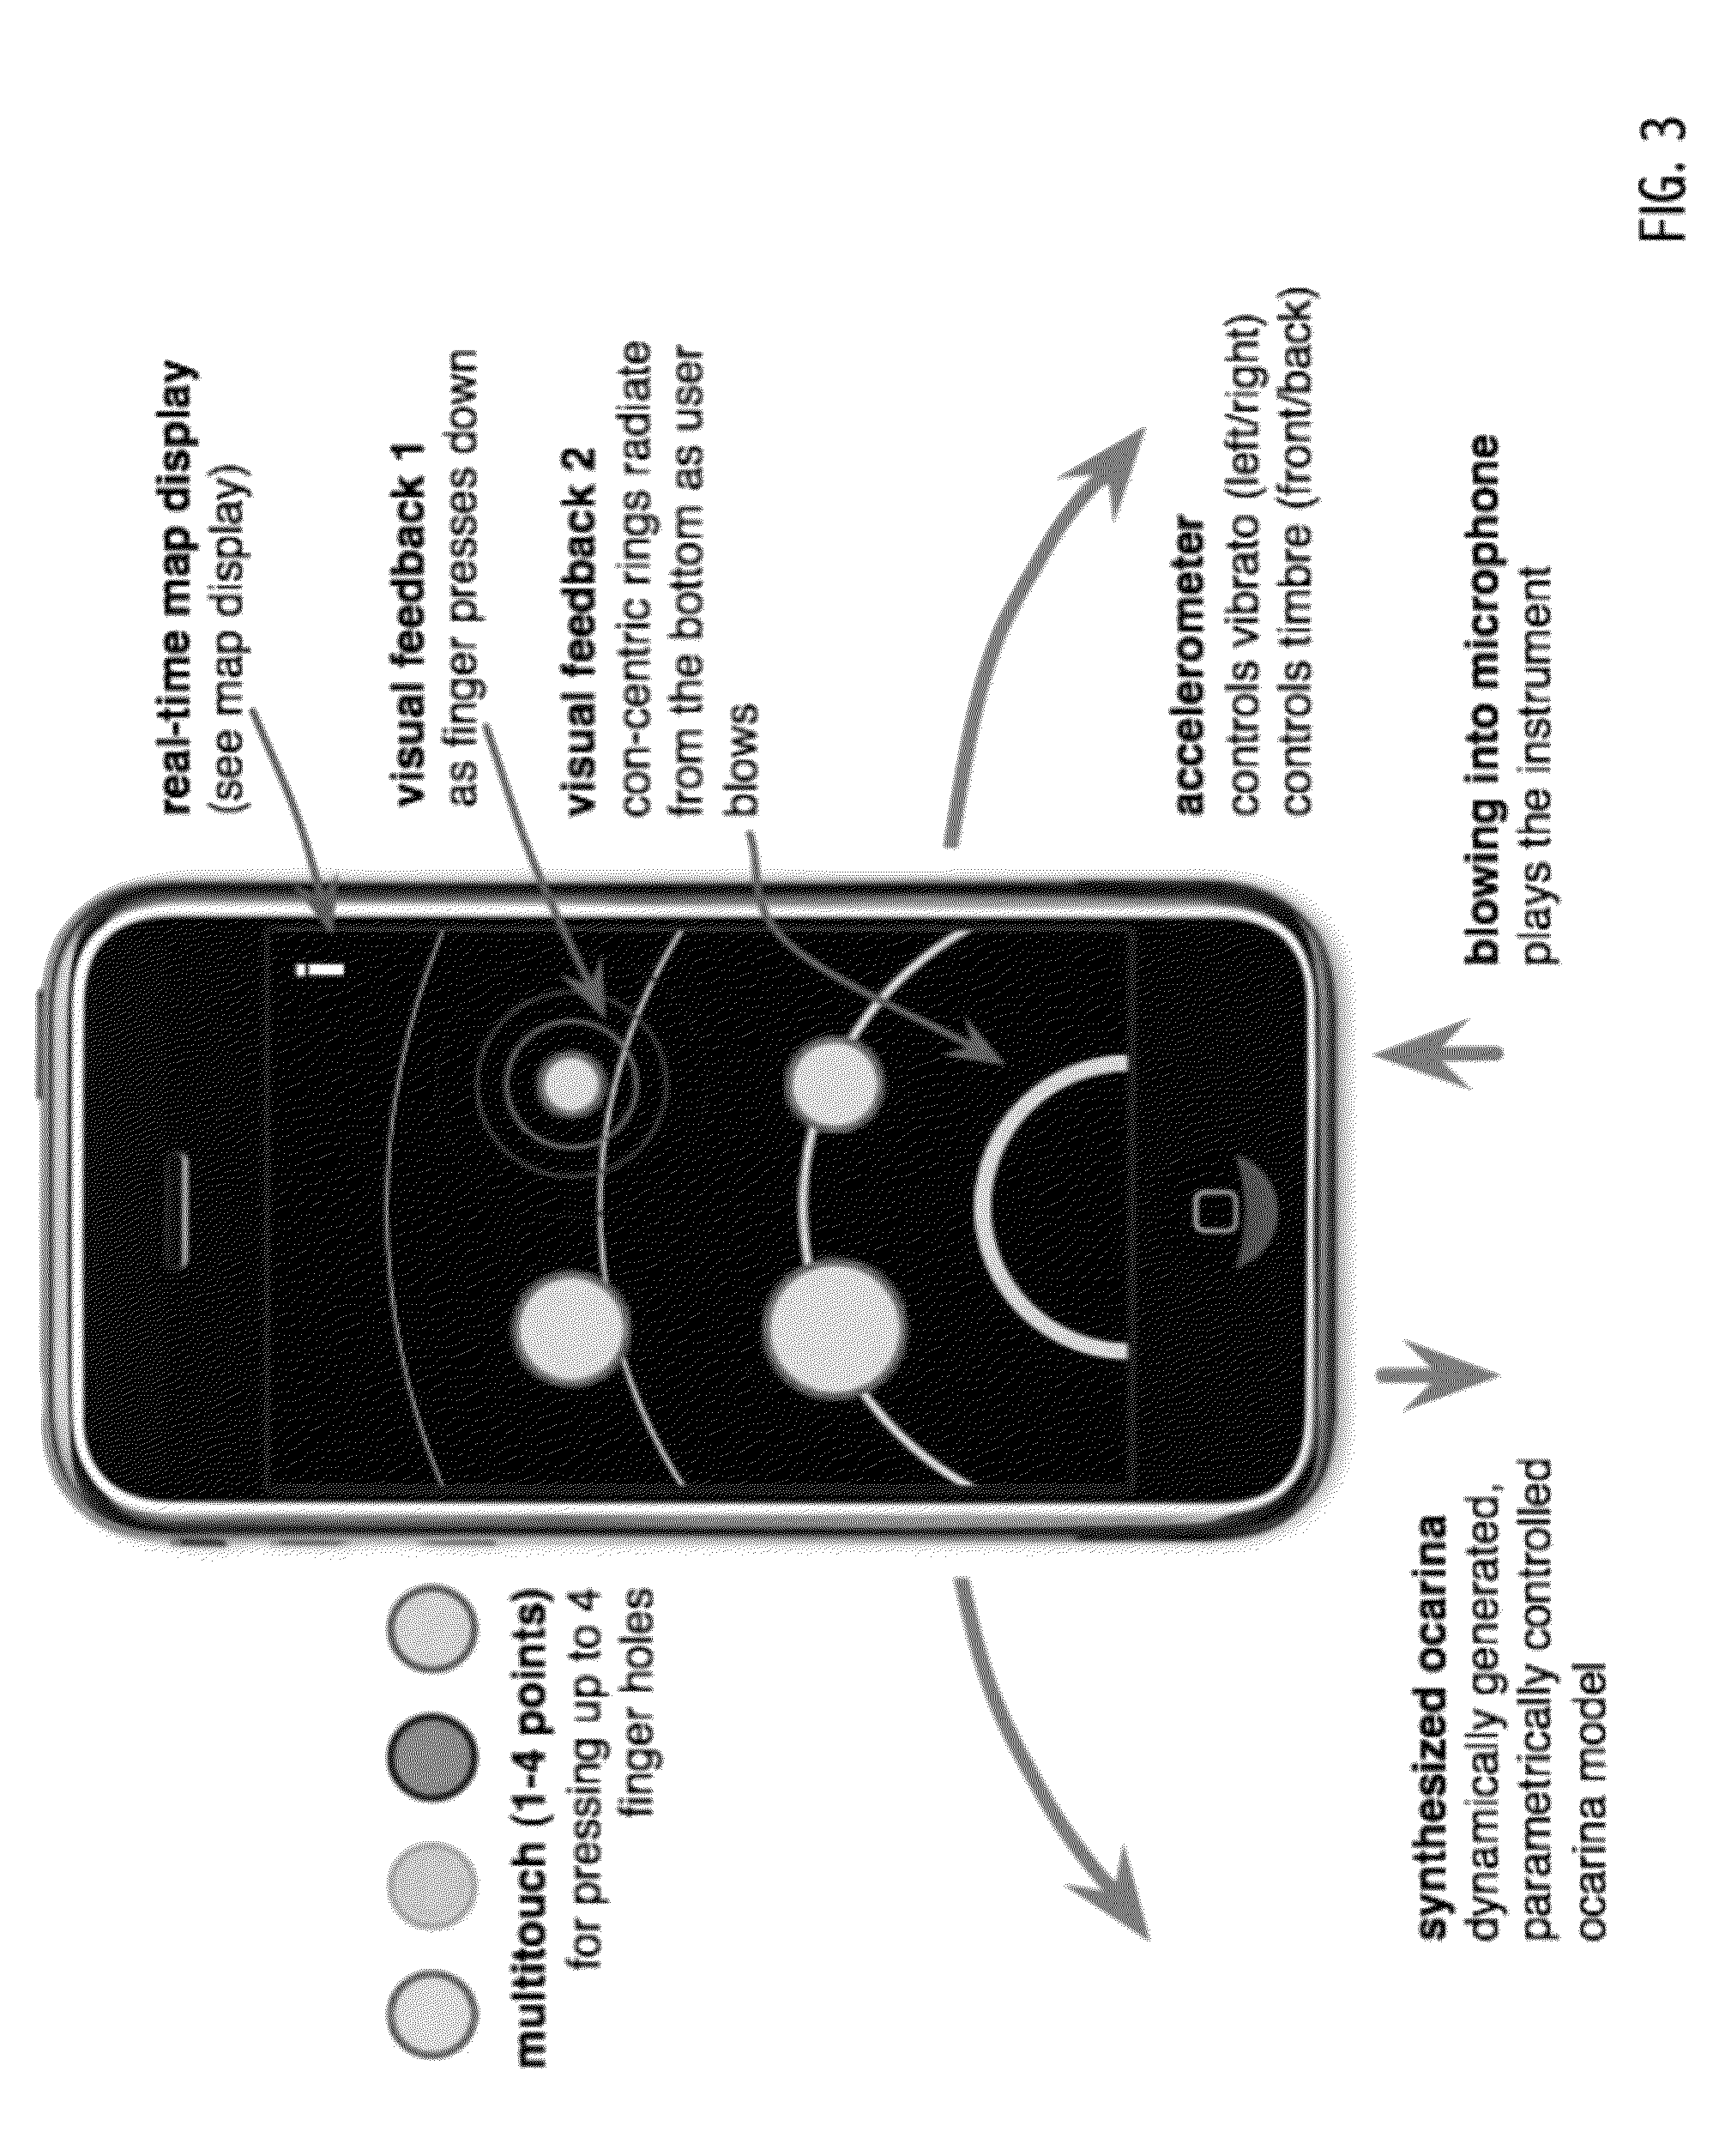 System and method for capture and rendering of performance on synthetic musical instrument